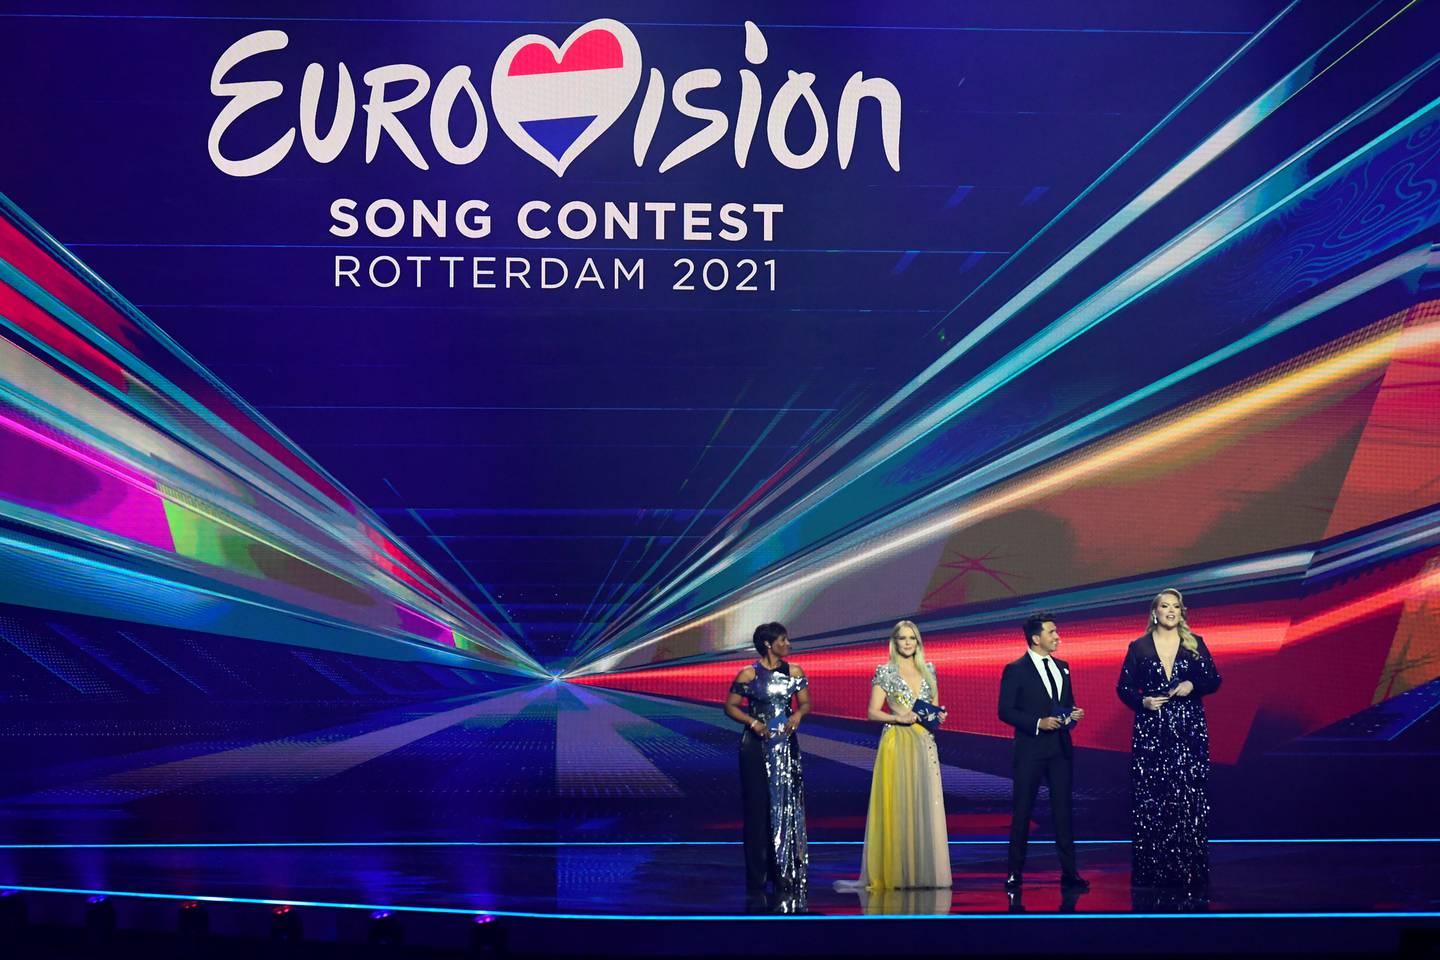 Presenters Dutch singers Edsilia Rombley, Chantal Janzen, Jan Smit and Dutch influential YouTuber Nikkie de Jager are seen on stage during first semi-final of the 2021 Eurovision Song Contest in Rotterdam, Netherlands May 18, 2021. REUTERS/Piroschka Van de Wouw